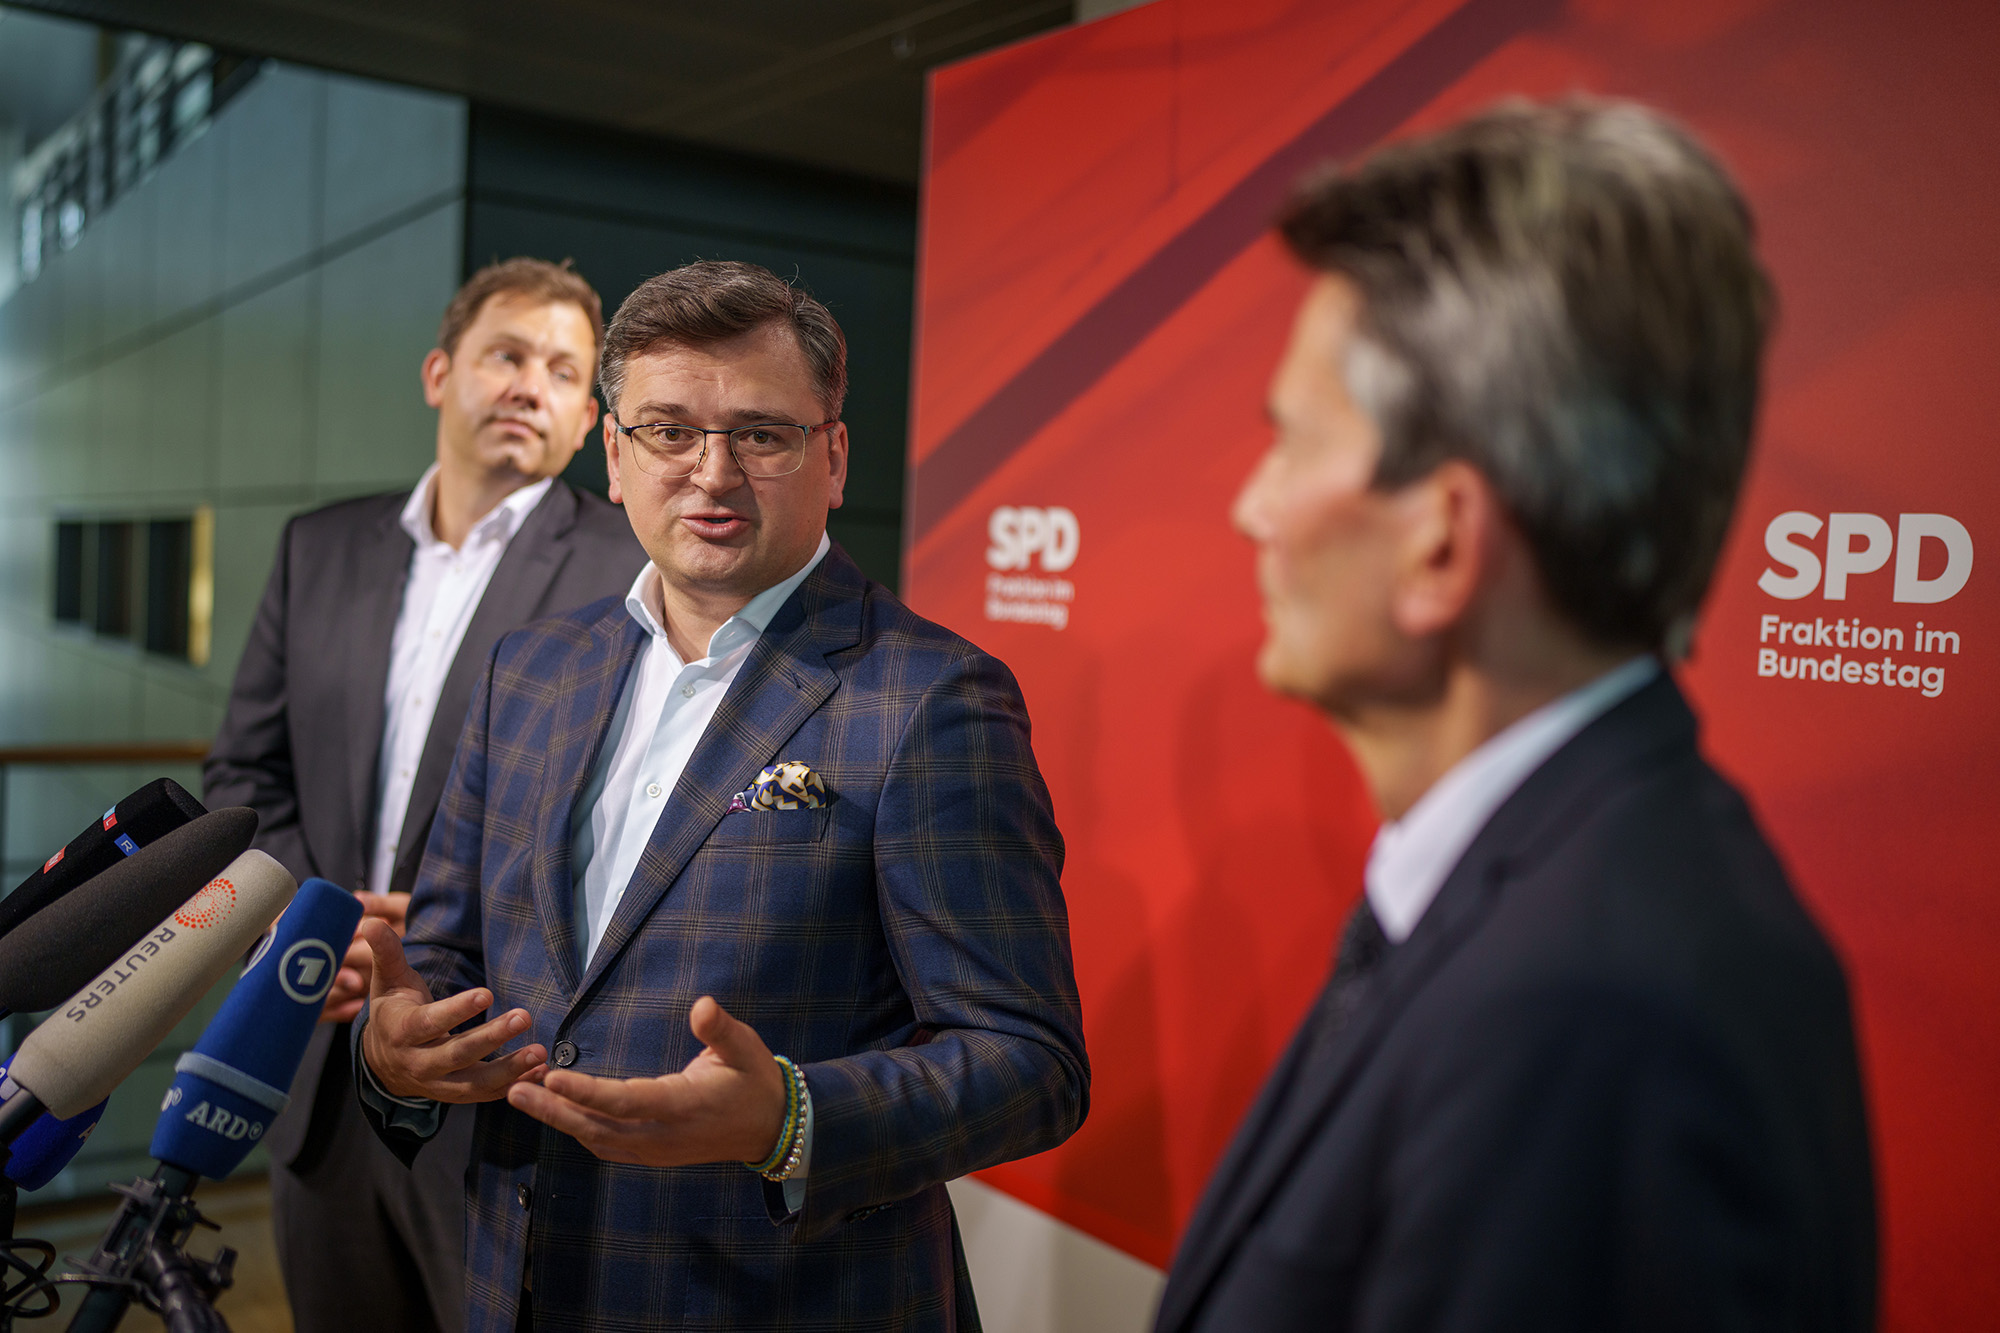 Ukrainian Foreign Minister Dmytro Kuleba, center, speaks between Lars Klingbeil, left, SPD federal chairman, and Rolf Mützenich, right, chairman of the SPD parliamentary group, after talks in the Bundestag, Berlin, Germany on May 12.